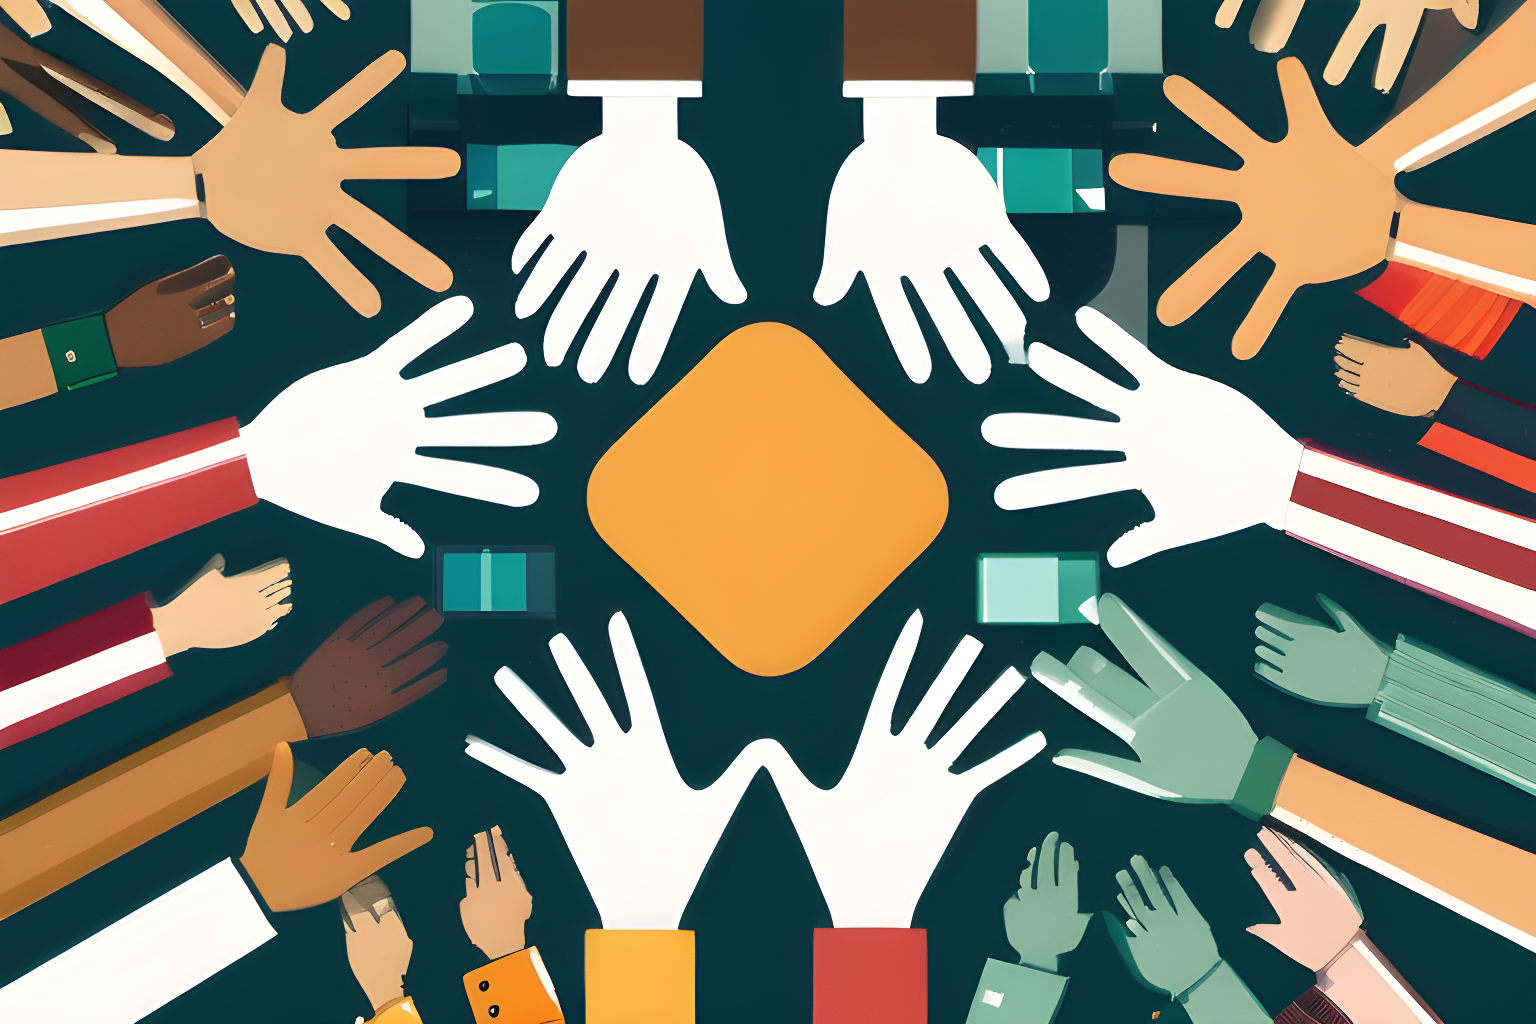 Generate an illustration showing a single computer system with numerous hands reaching out to touch it. These hands should represent a diverse group of individuals.